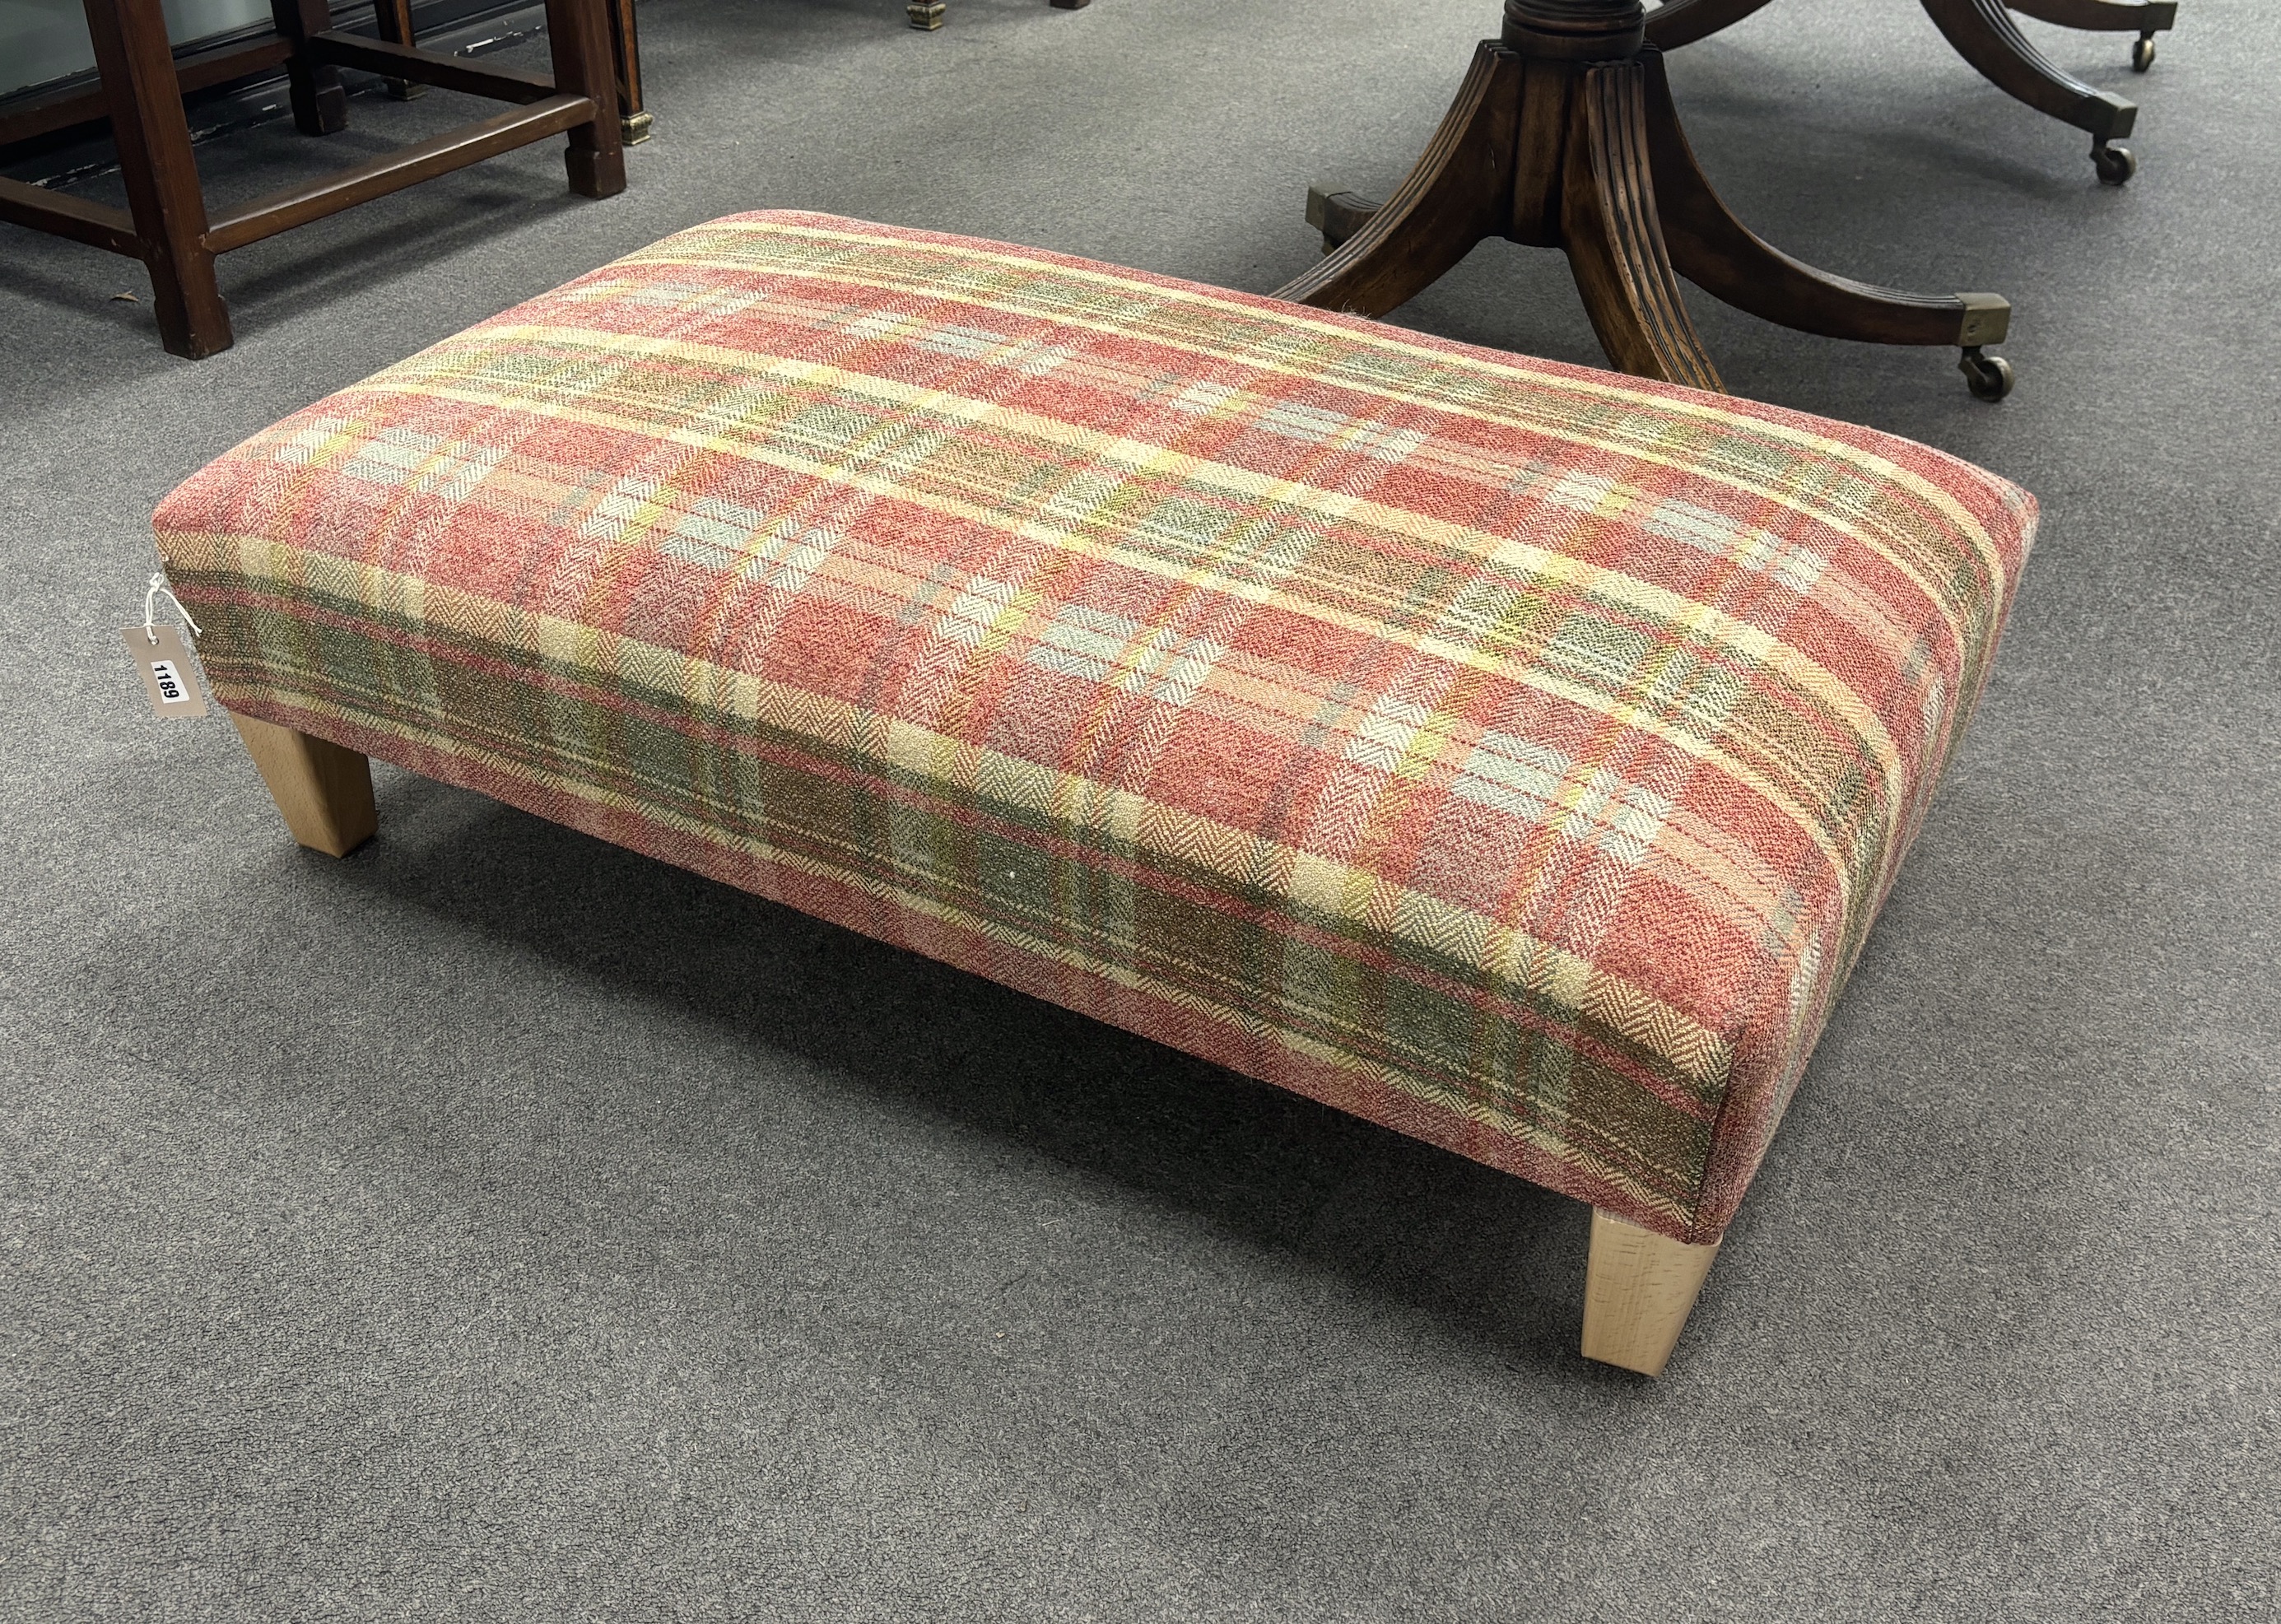 A contemporary rectangular footstool upholstered in Colefax and Fowler Magnus plaid, width 103cm, depth 63cm, height 32cm